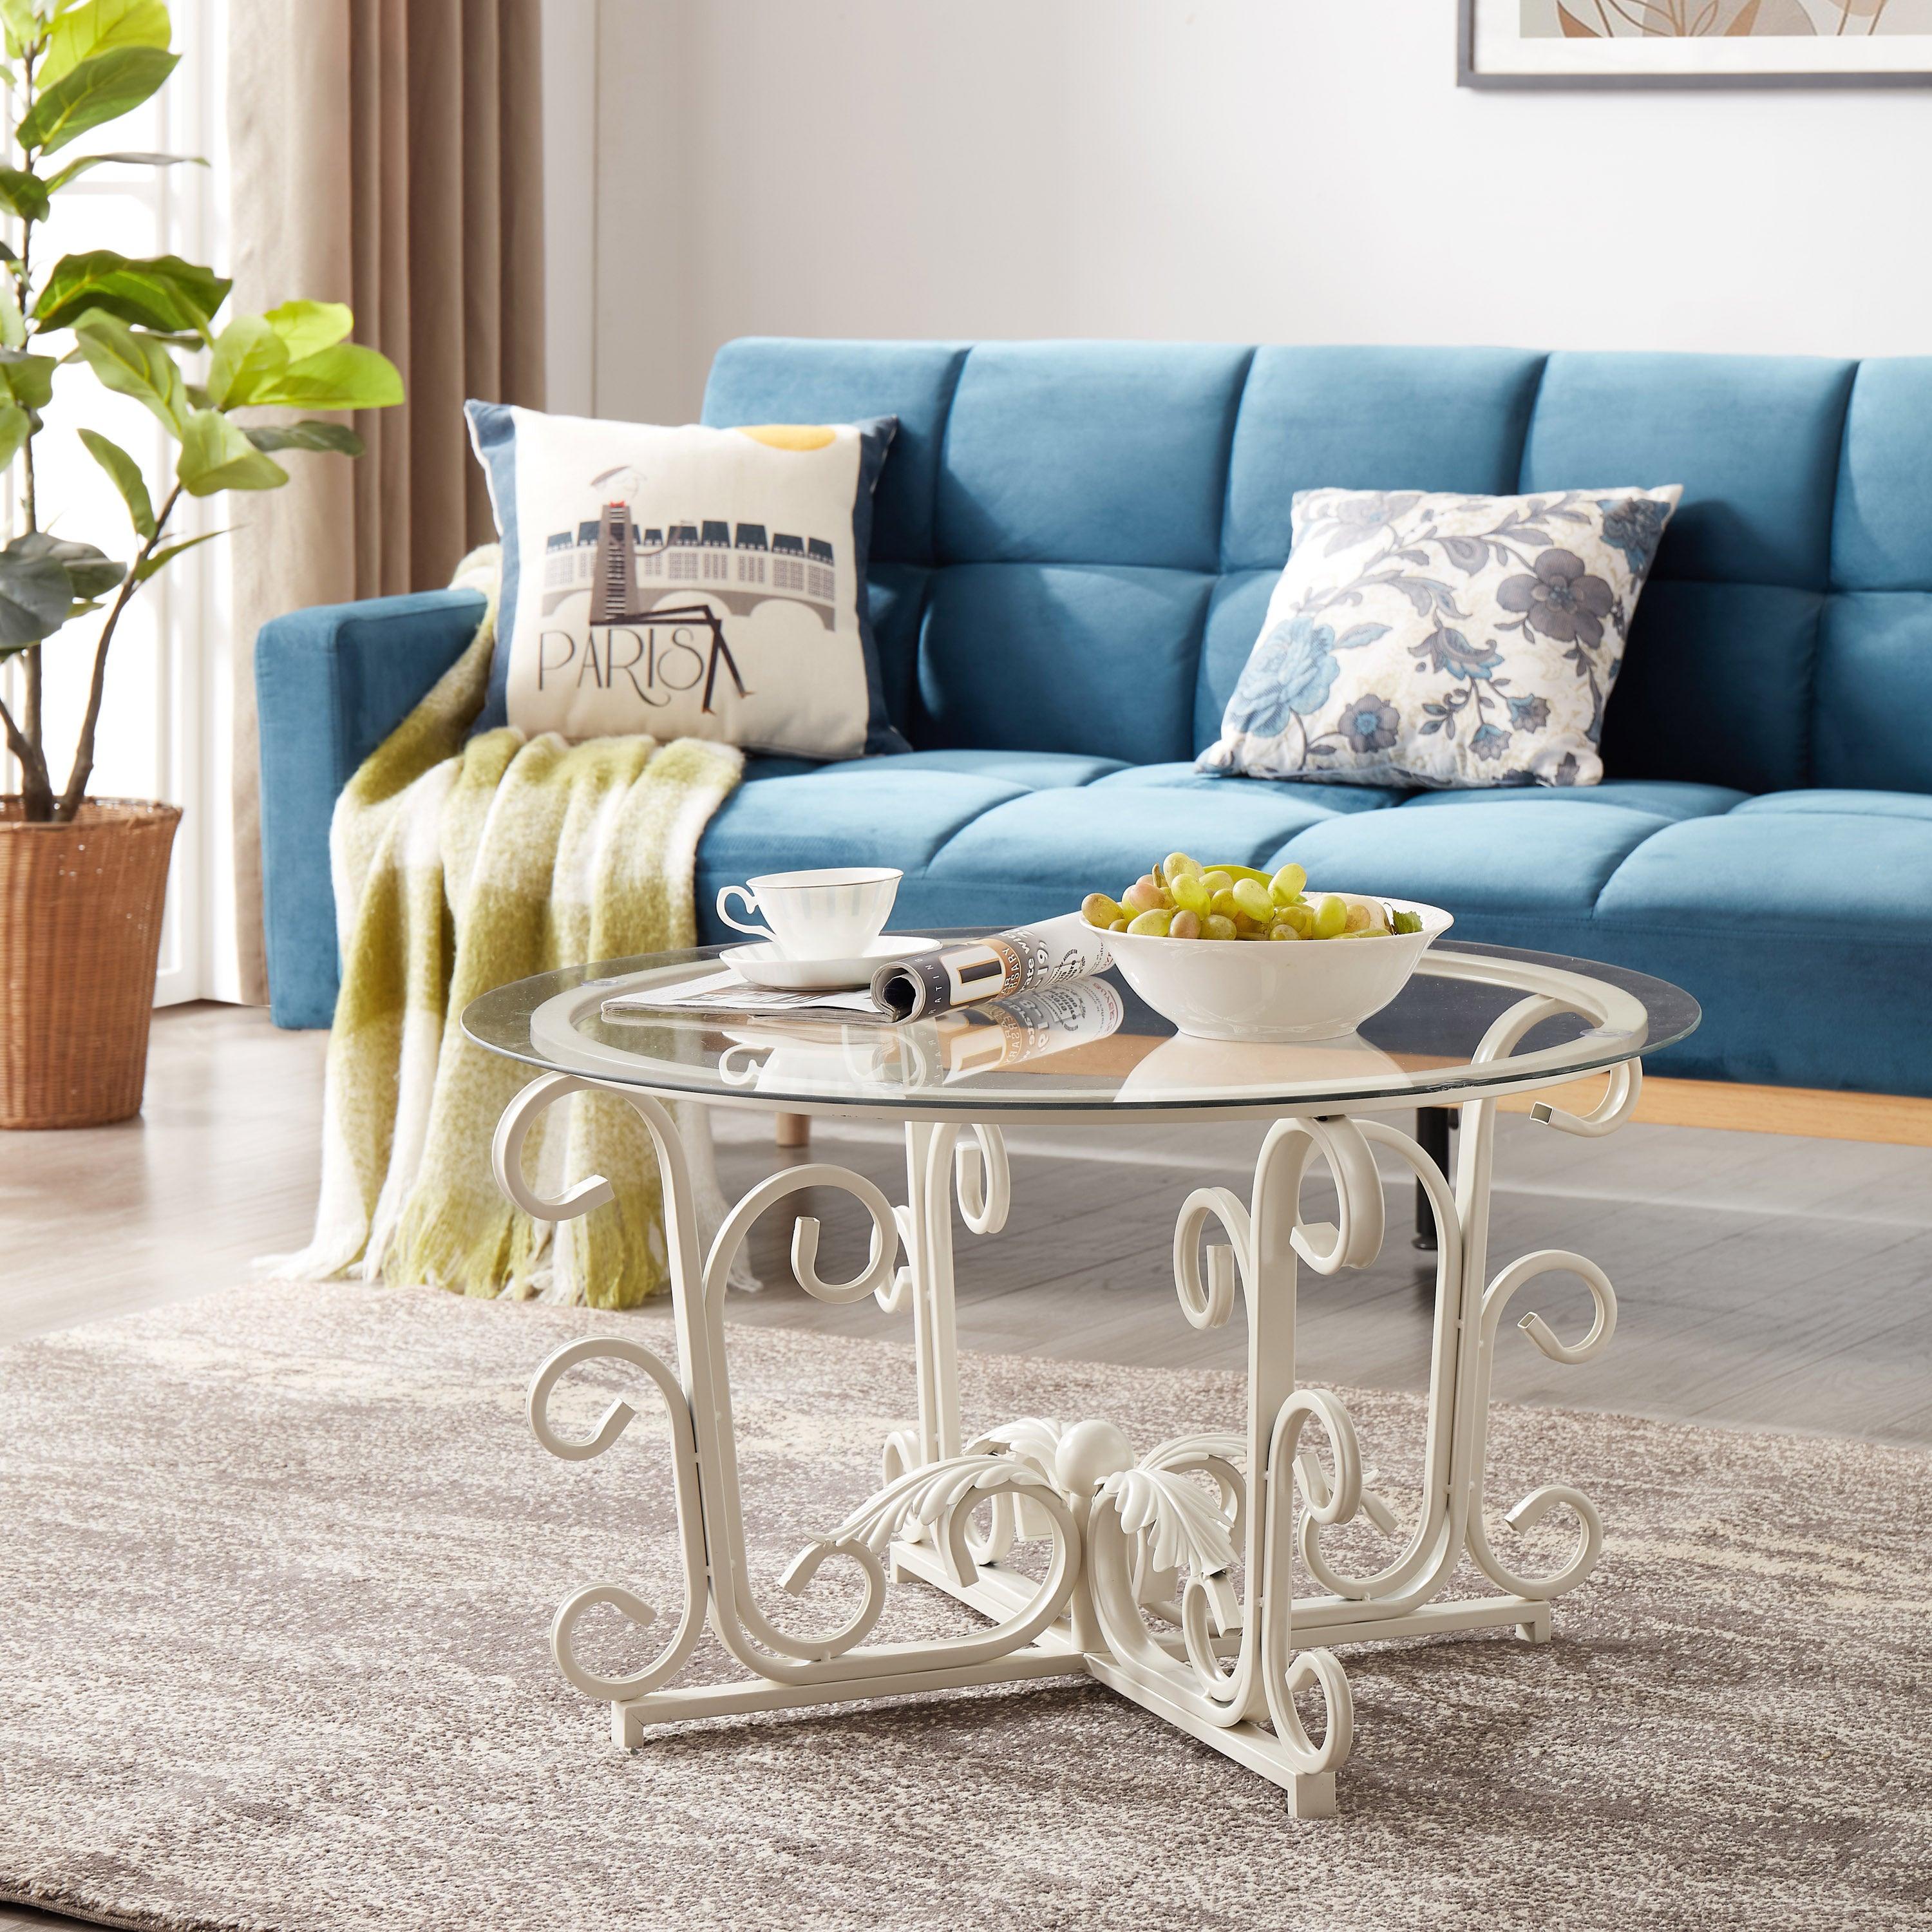 🆓🚛 Glass Coffee Table With Sturdy Iron Leaf-Shape Base, Leisure Cocktail Table With Tempered Glass Top for Living Room, Dining Room (White)